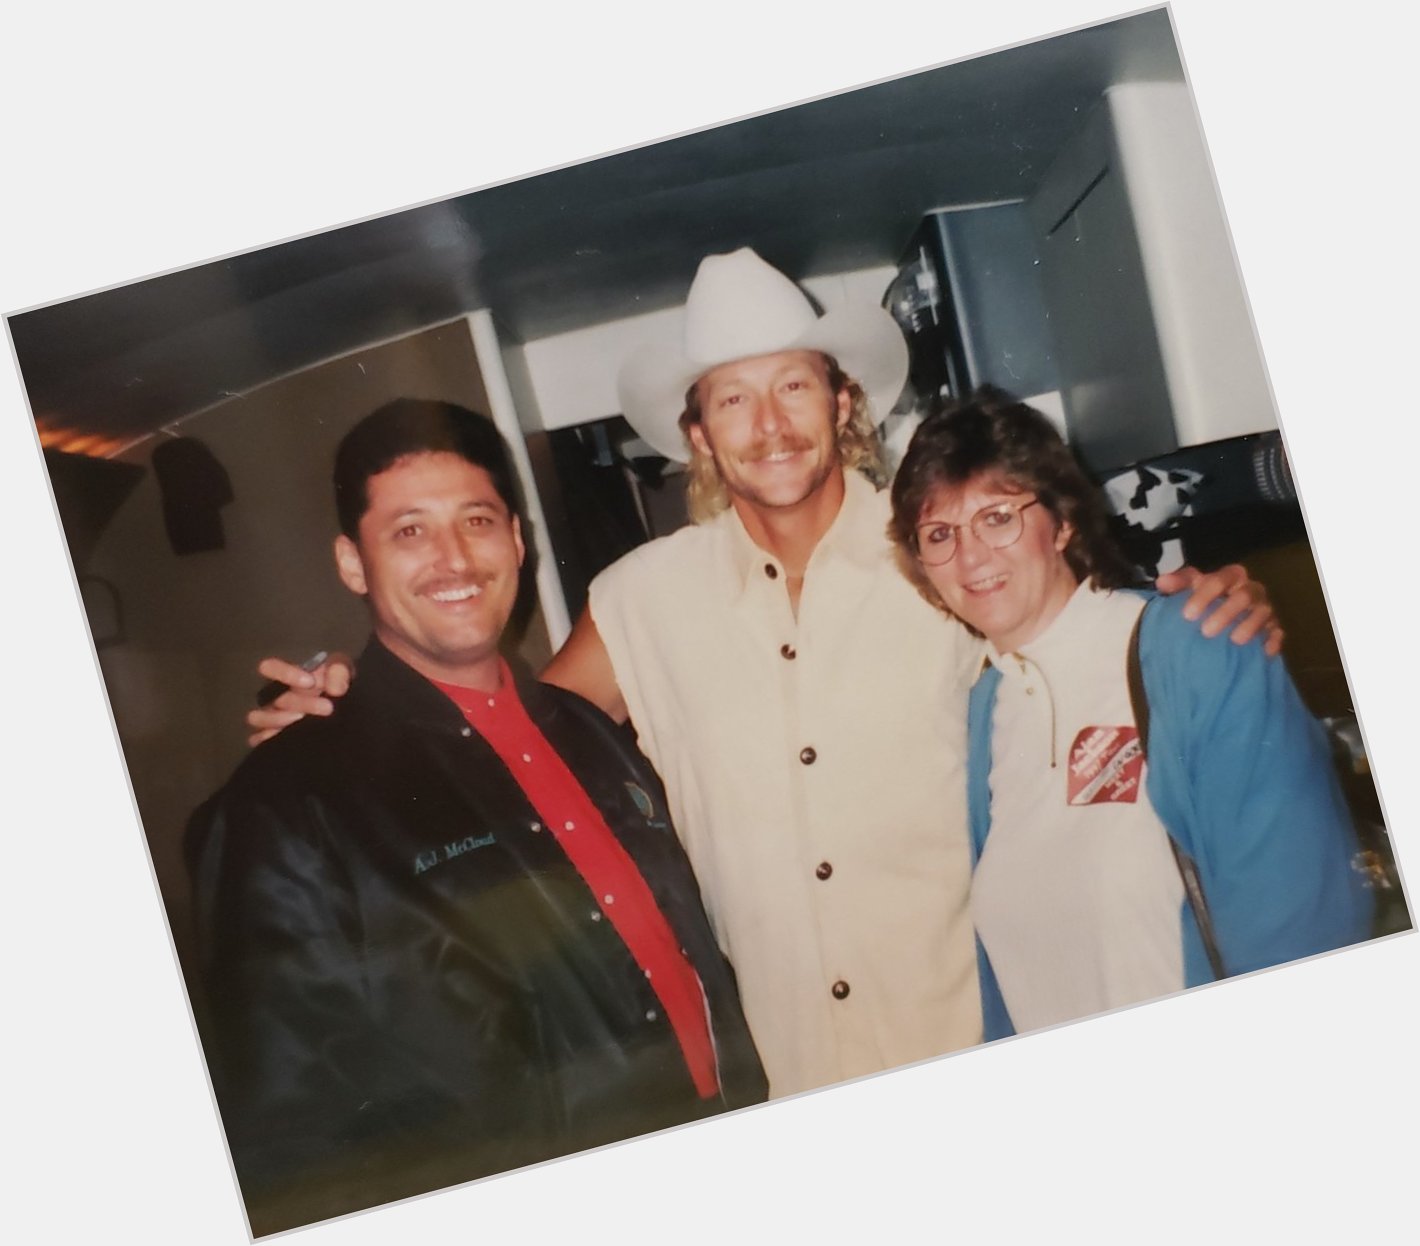 Happy Birthday Alan Jackson. This photo was taken in the 1990s at Star Lake Amphitheater in Burgettstown, PA. 